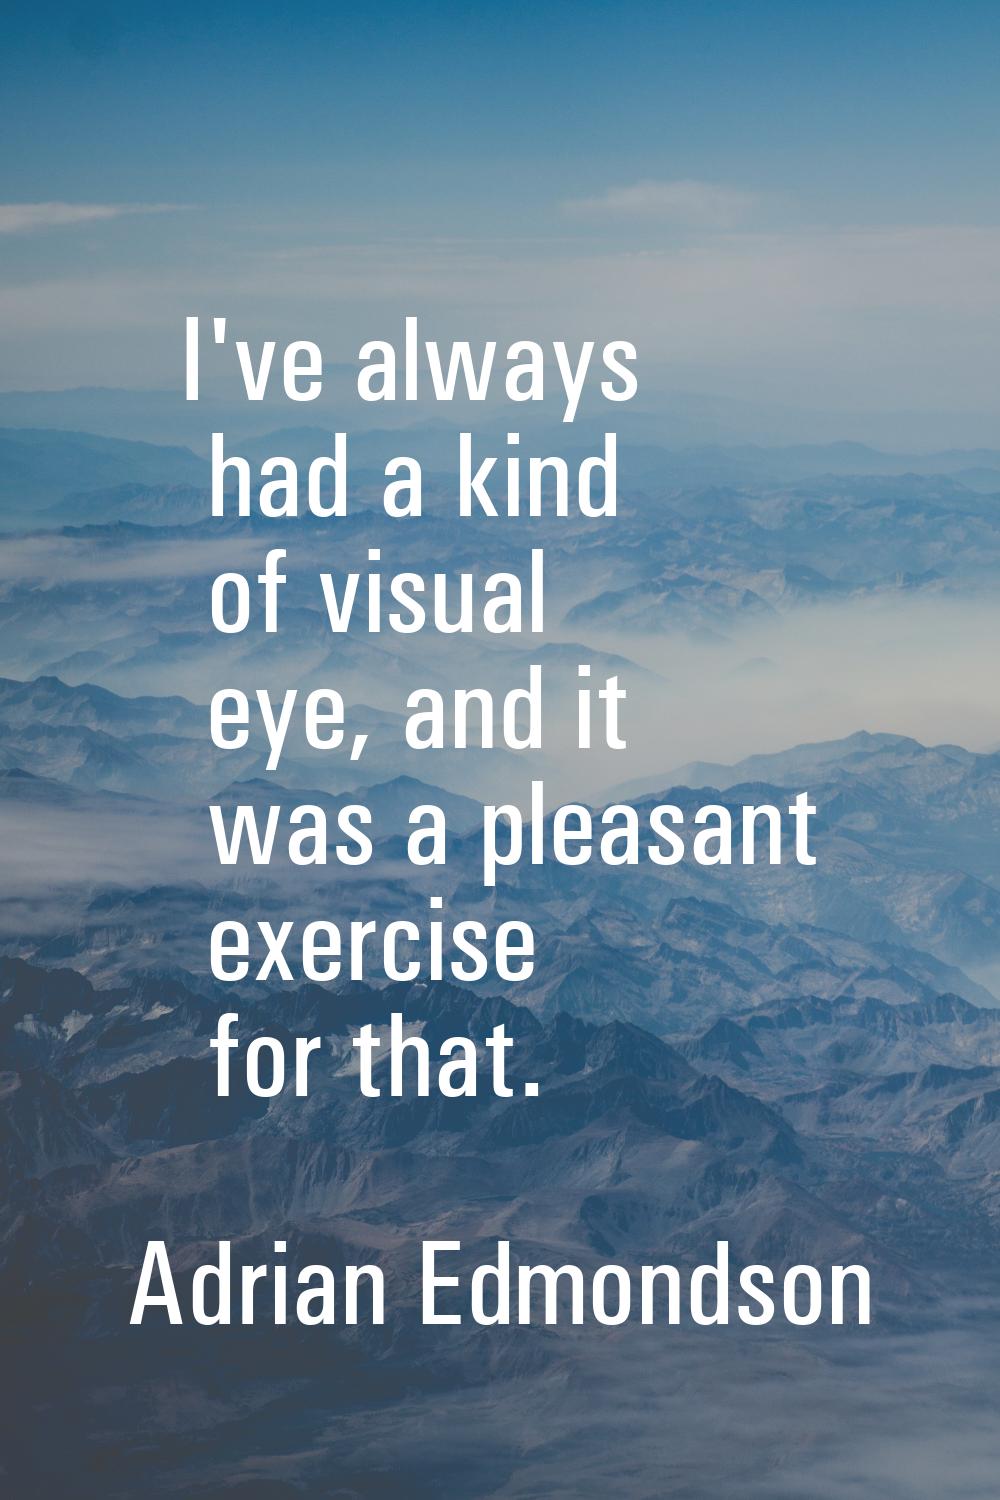 I've always had a kind of visual eye, and it was a pleasant exercise for that.